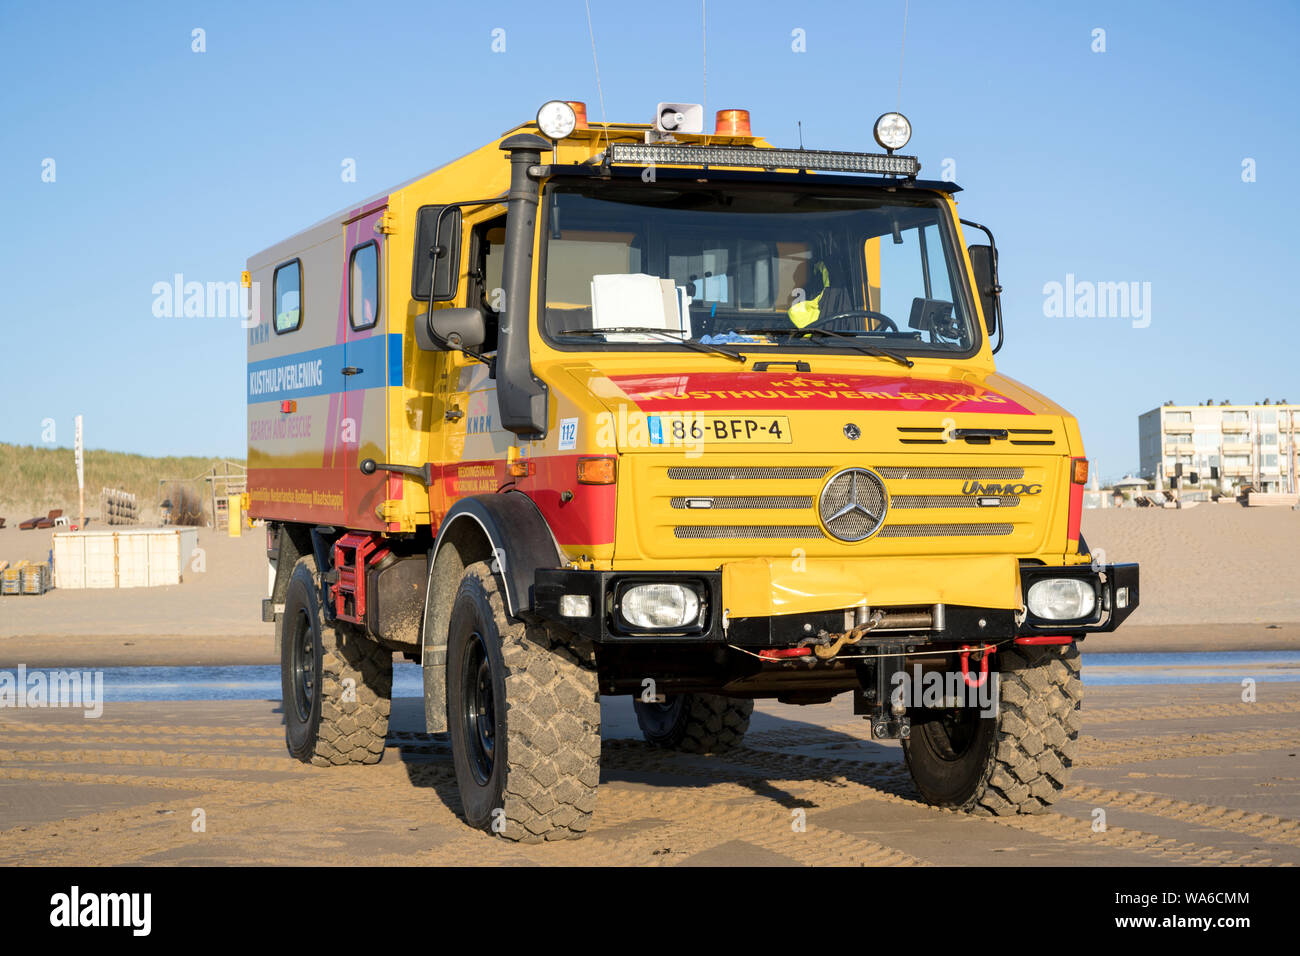 KNRM Mercedes-Benz Unimog on the beach. KNRM is the voluntary organization in the Netherlands tasked with saving lives at sea. Stock Photo